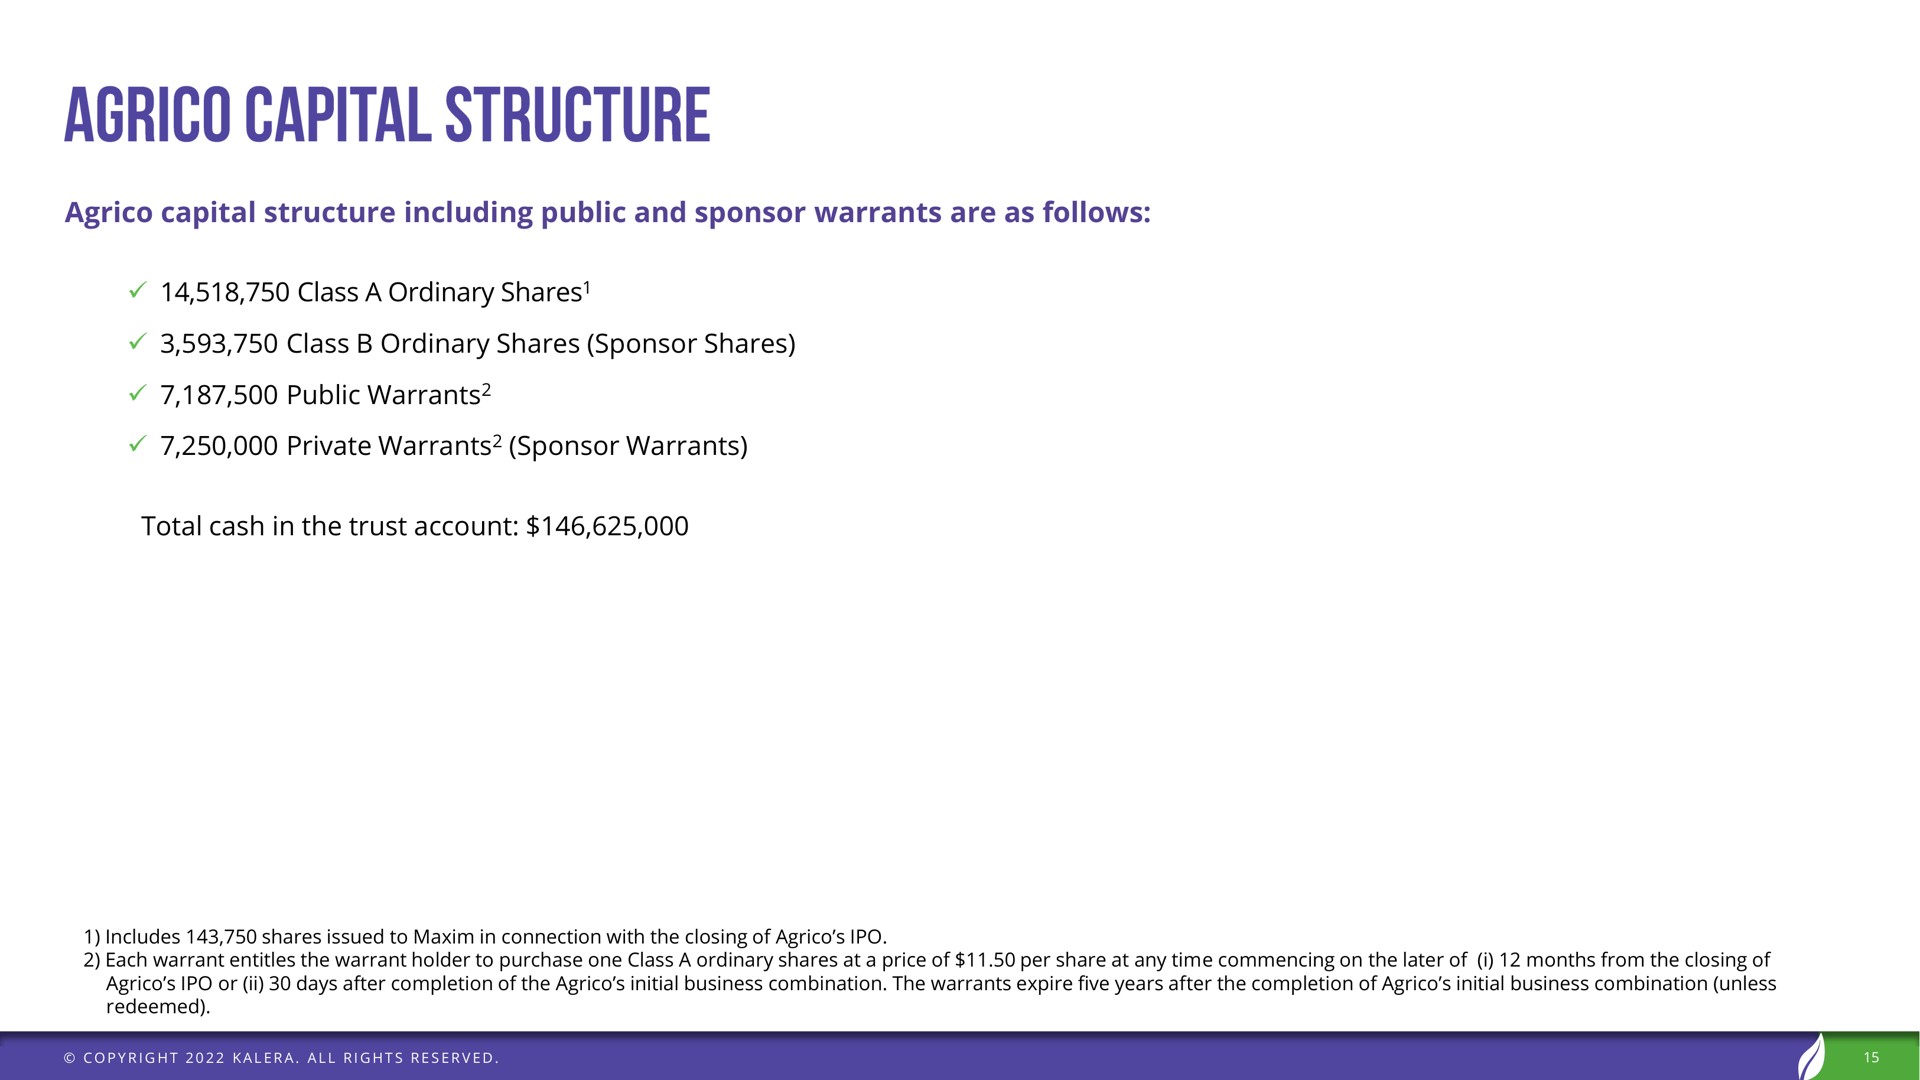 capital structure including public and sponsor warrants are as follows class a ordinary shares class ordinary shares sponsor shares public warrants private warrants sponsor warrants total cash in the trust account | Kalera